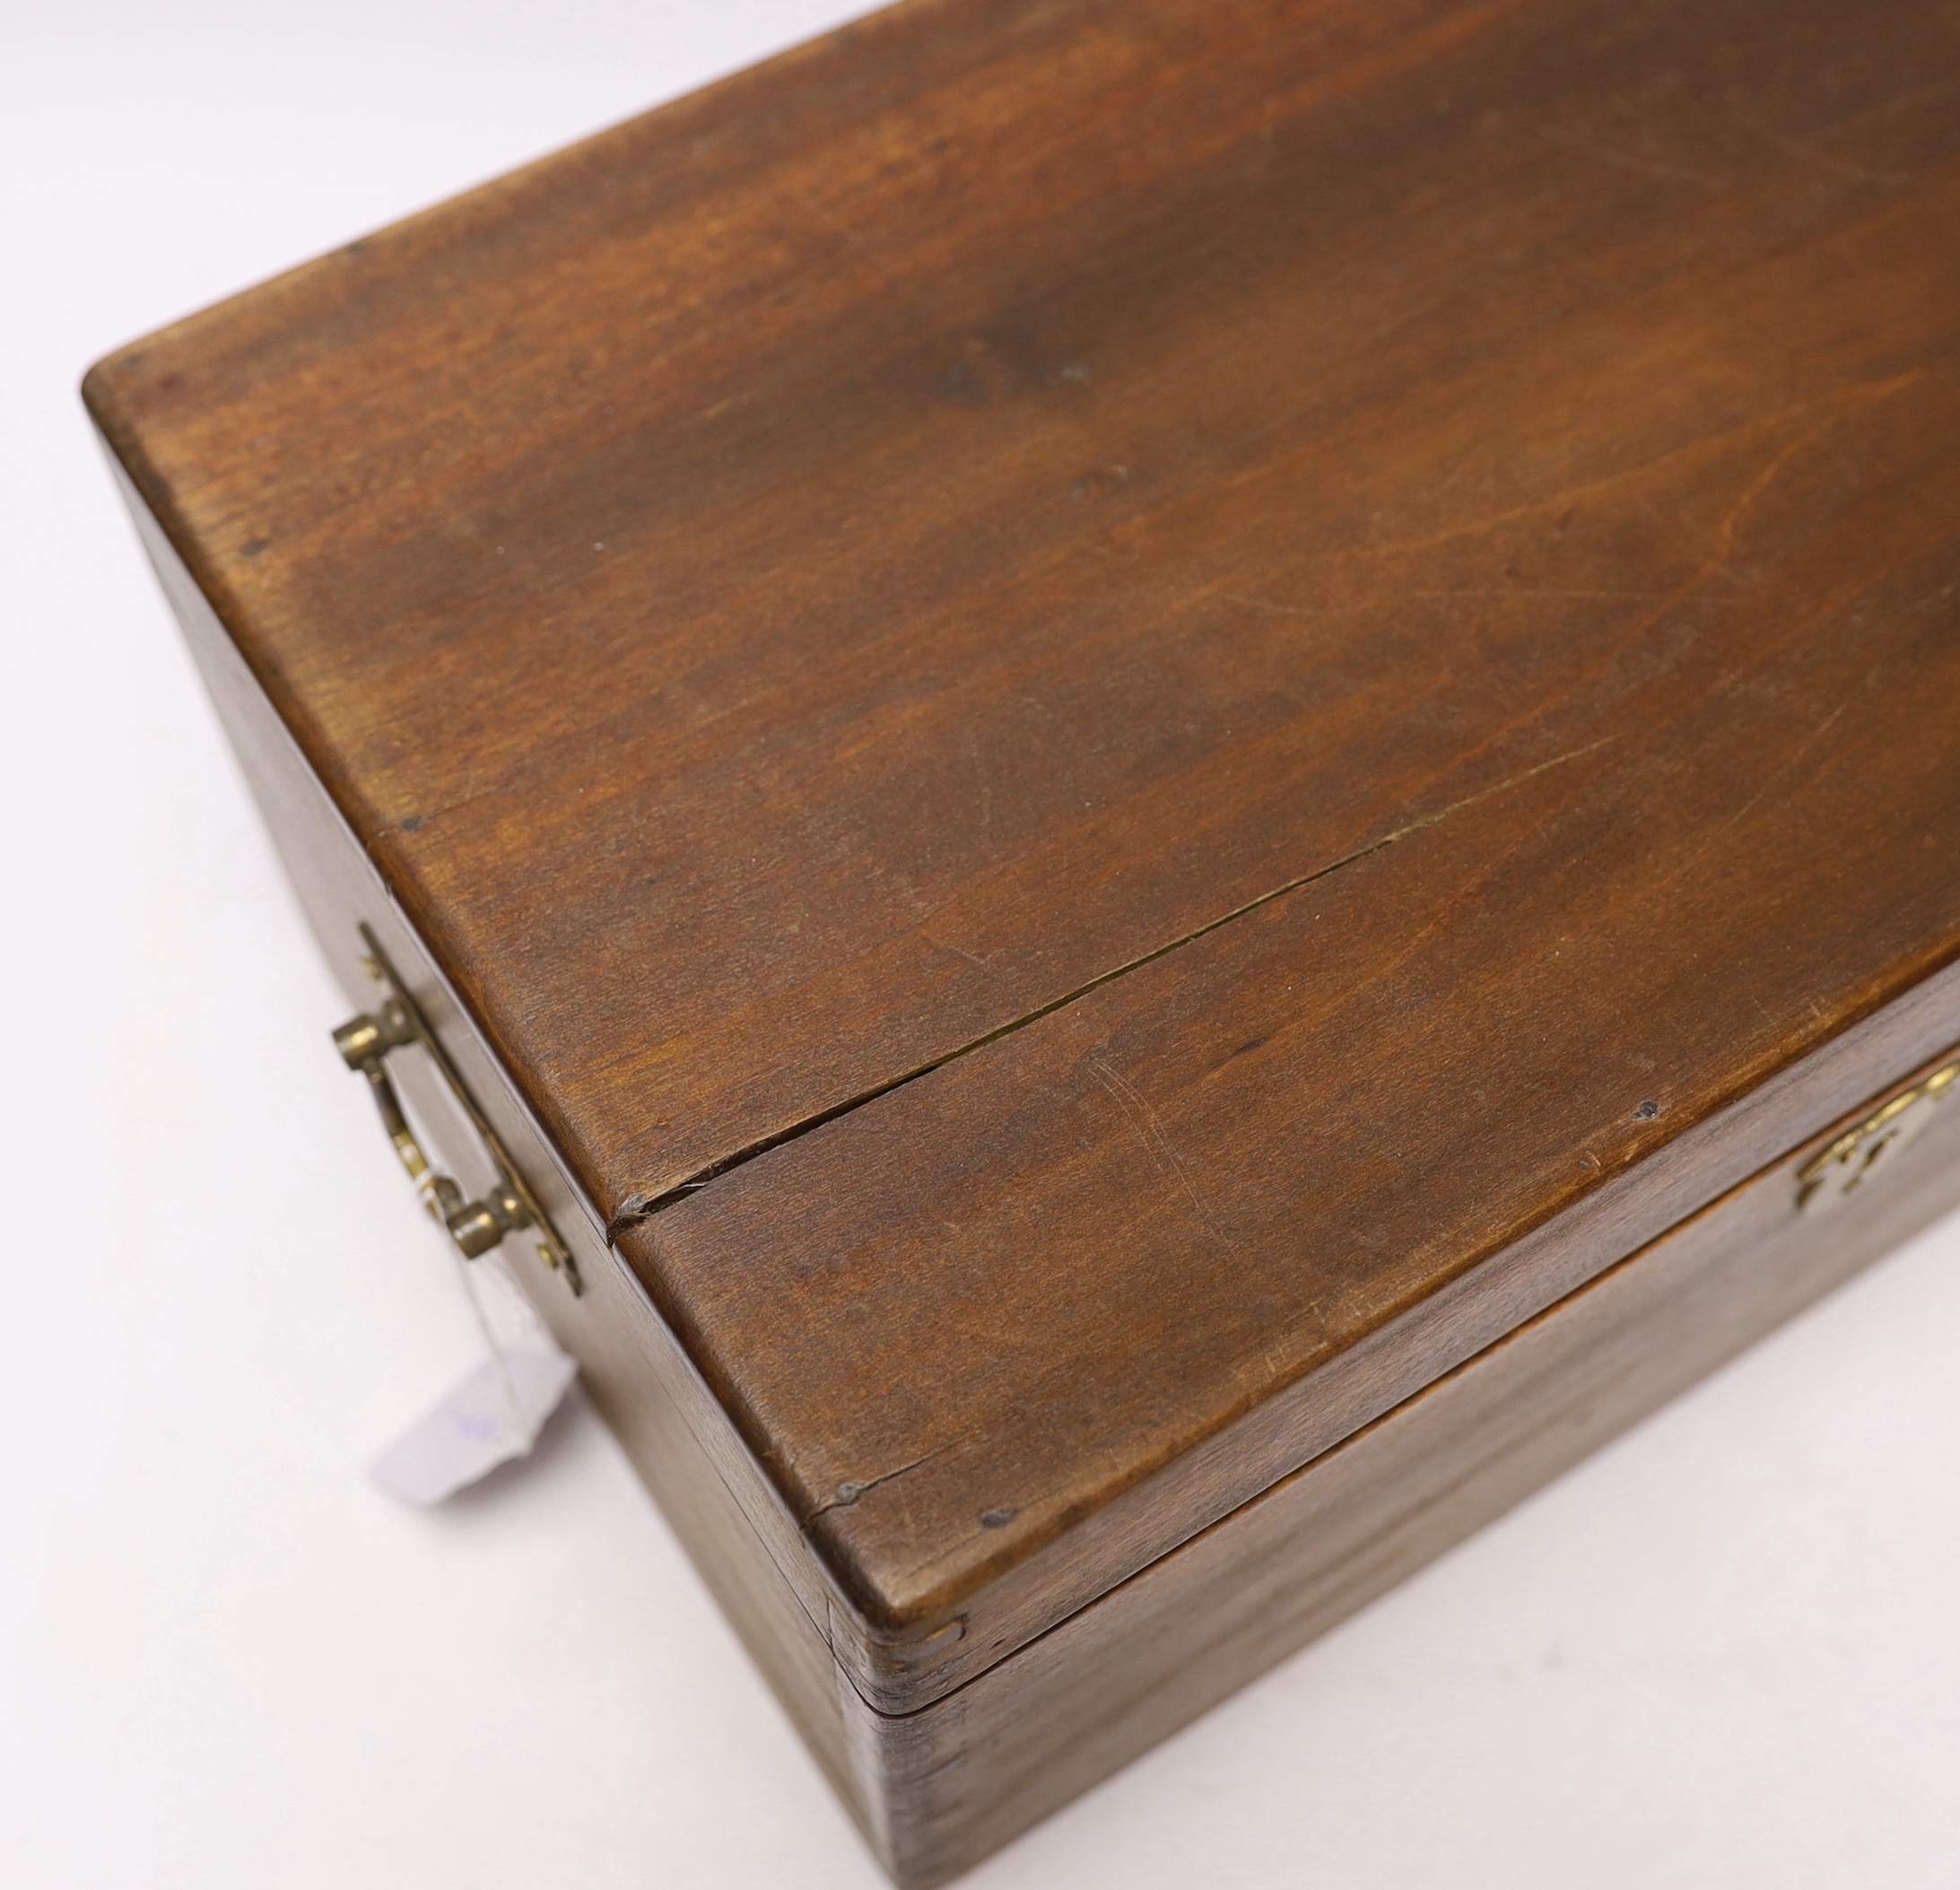 Two mahogany boxes of gun tools, including; bullet moulds, files, a vice, musket balls, etc.